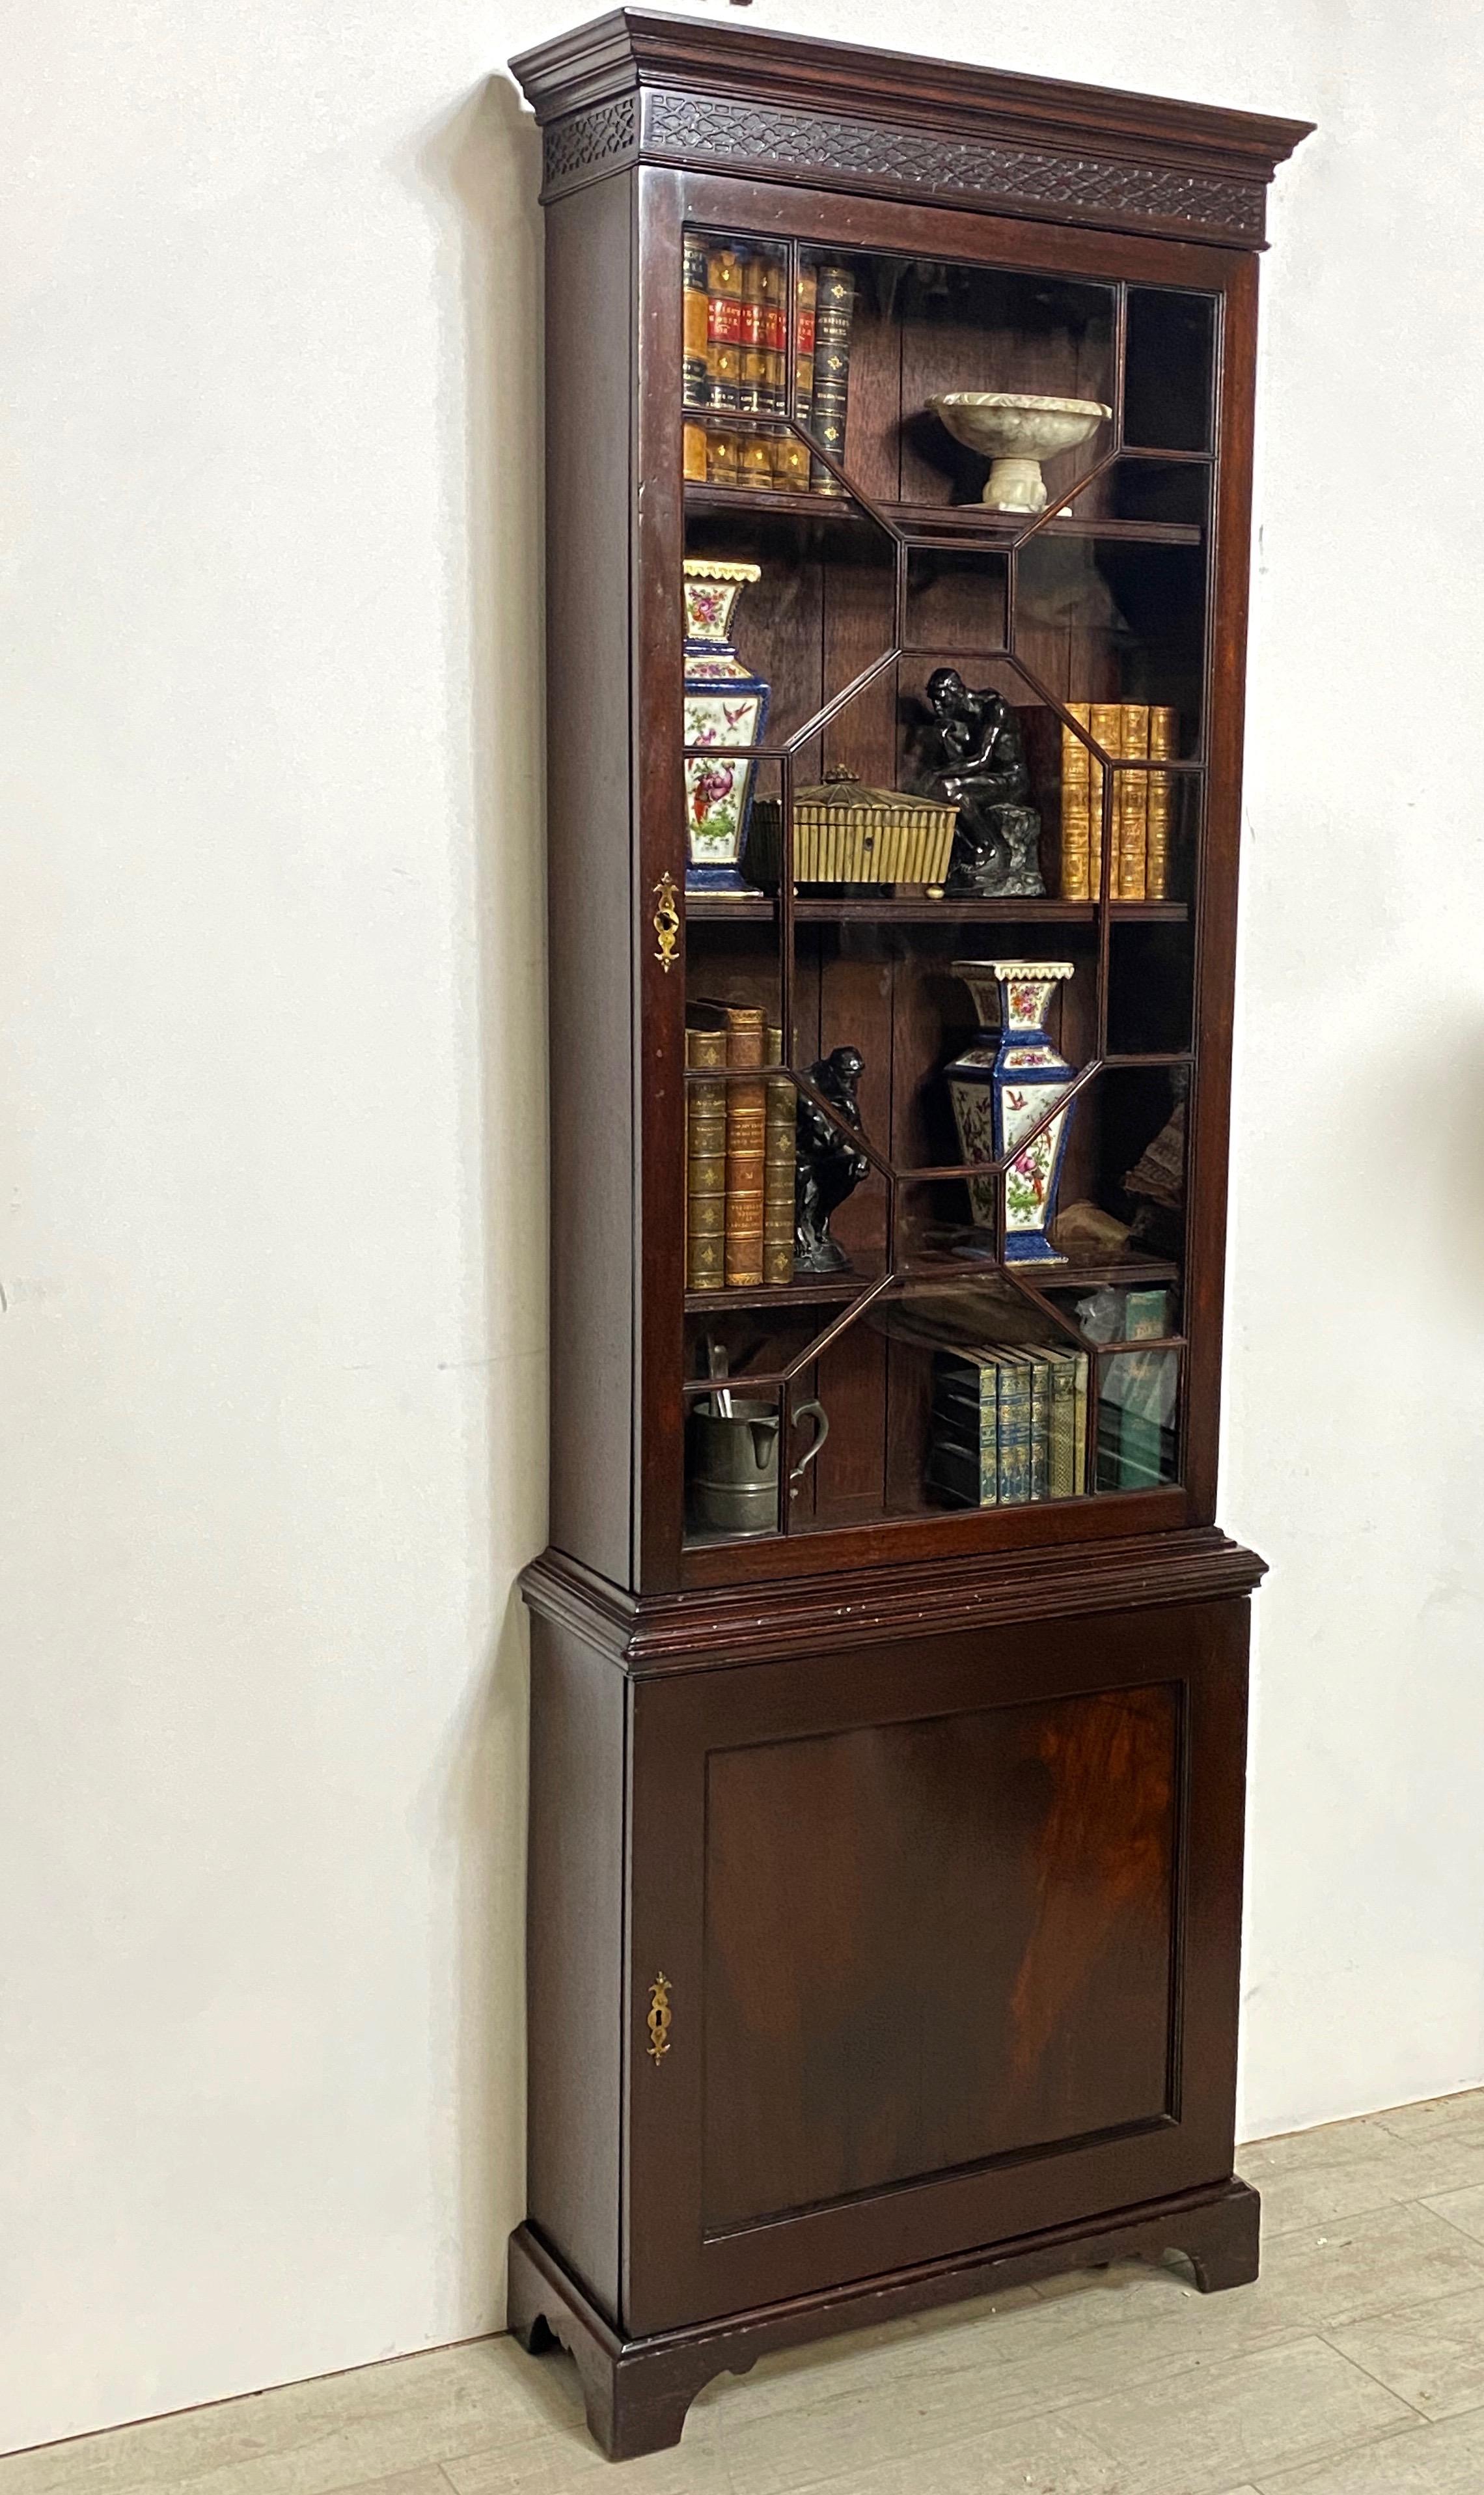 An unusually slender George III period mahogany bookcase / cabinet. Paned glass top section over a lower cabinet with a single shelf. 
In excellent original condition with original finish. 
Easy to use size in just about any room.
England, 1st